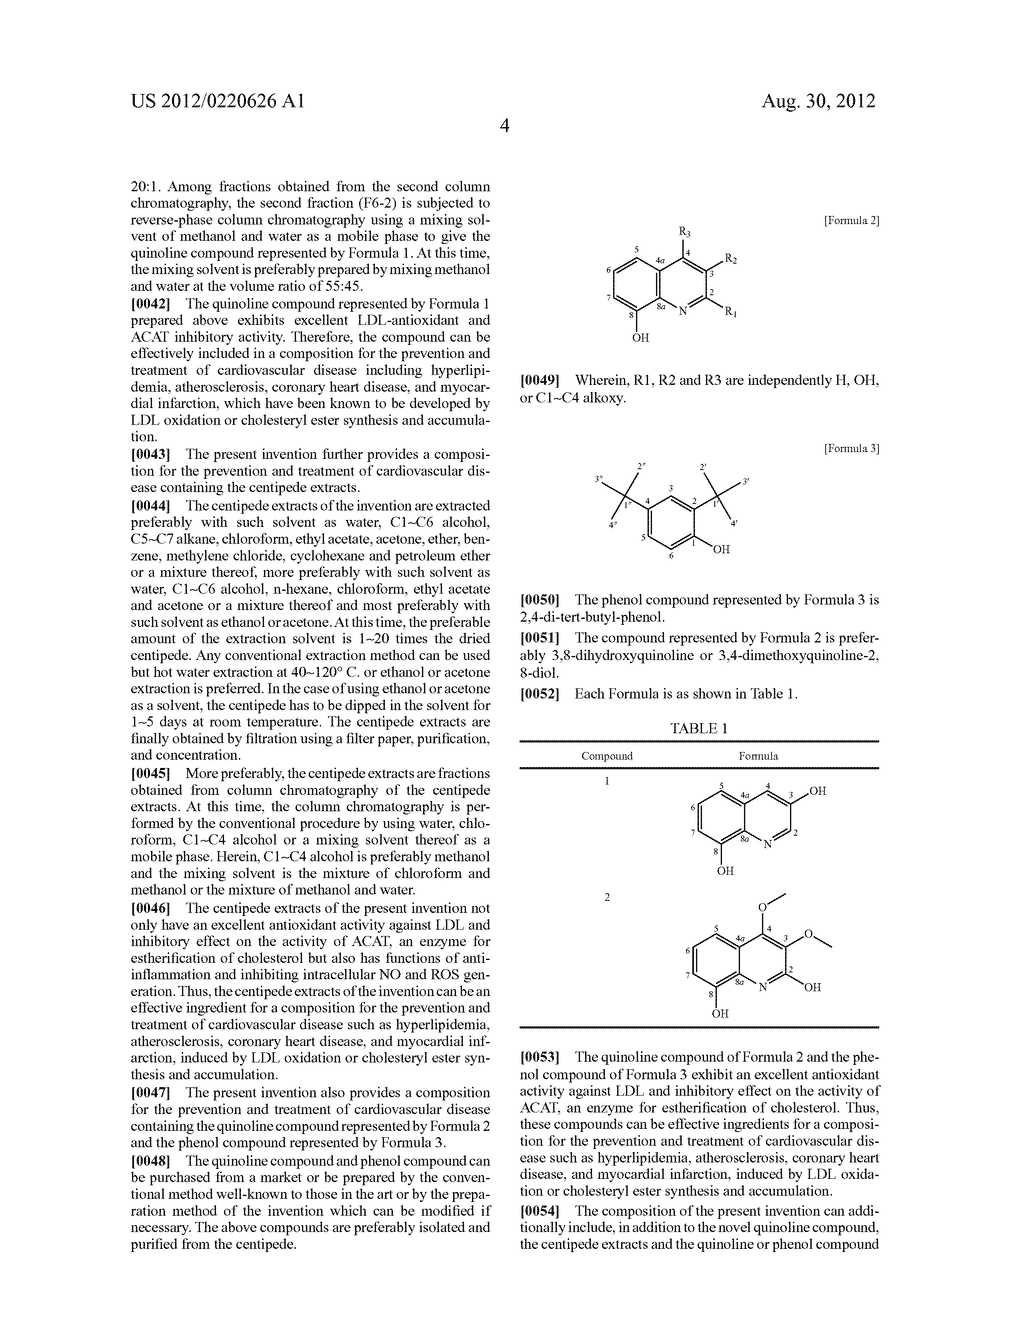 NOVEL QUINOLINE COMPOUND, AND COMPOSITION CONTAINING CENTIPEDE EXTRACT OR     COMPOUNDS ISOLATED THEREFROM FOR PREVENTION AND TREATMENT OF     CARDIOVASCULAR DISEASE - diagram, schematic, and image 06